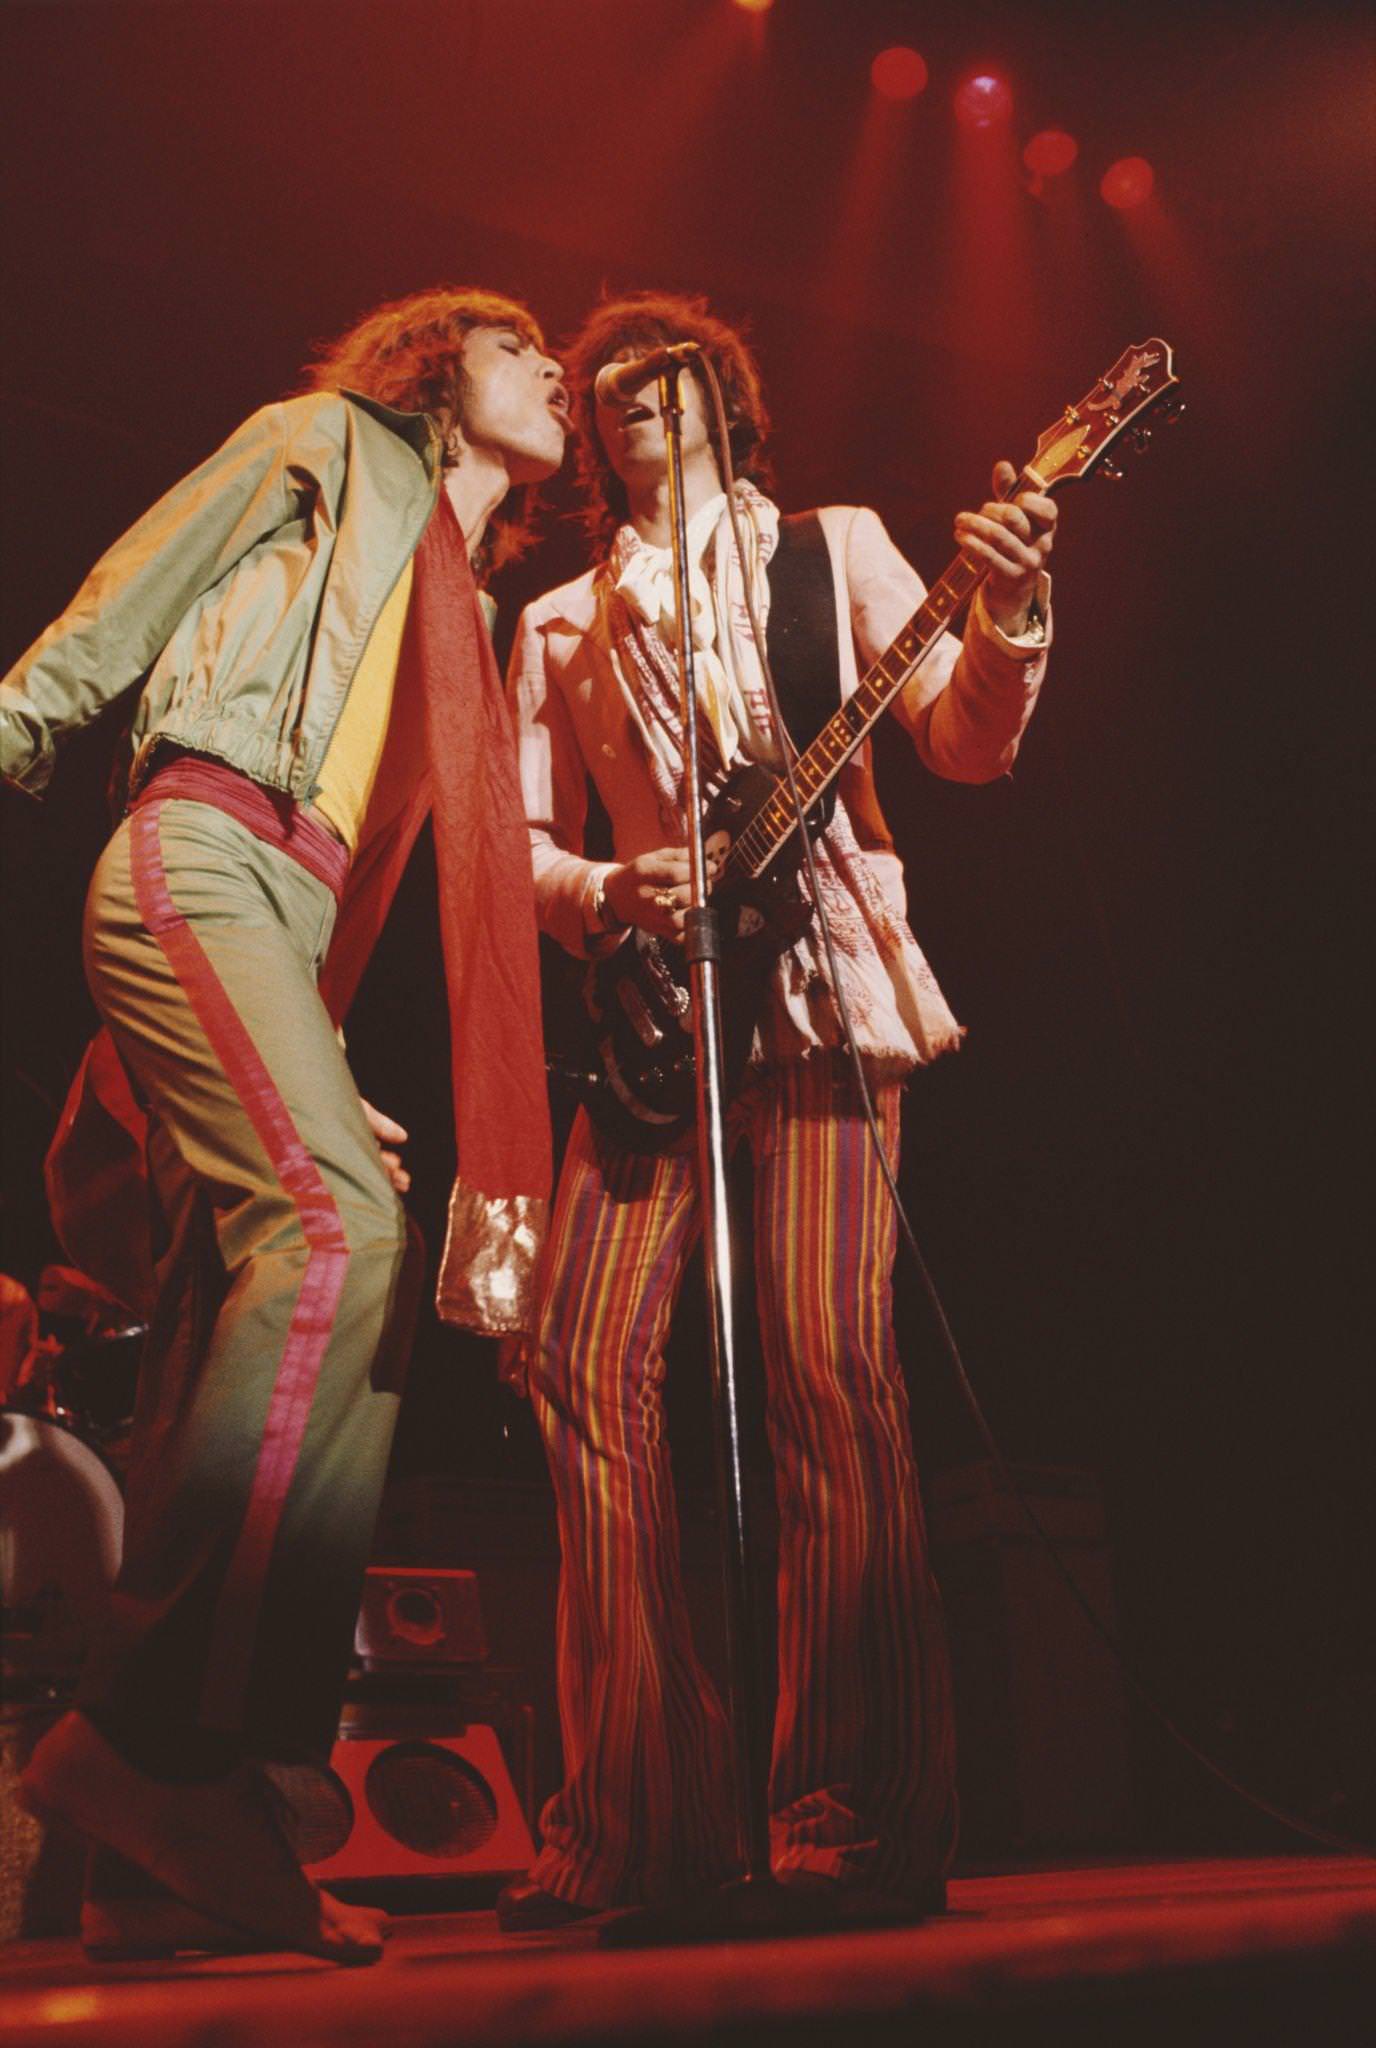 Mick Jagger and Keith Richards perform on stage during the tour, June 1975.